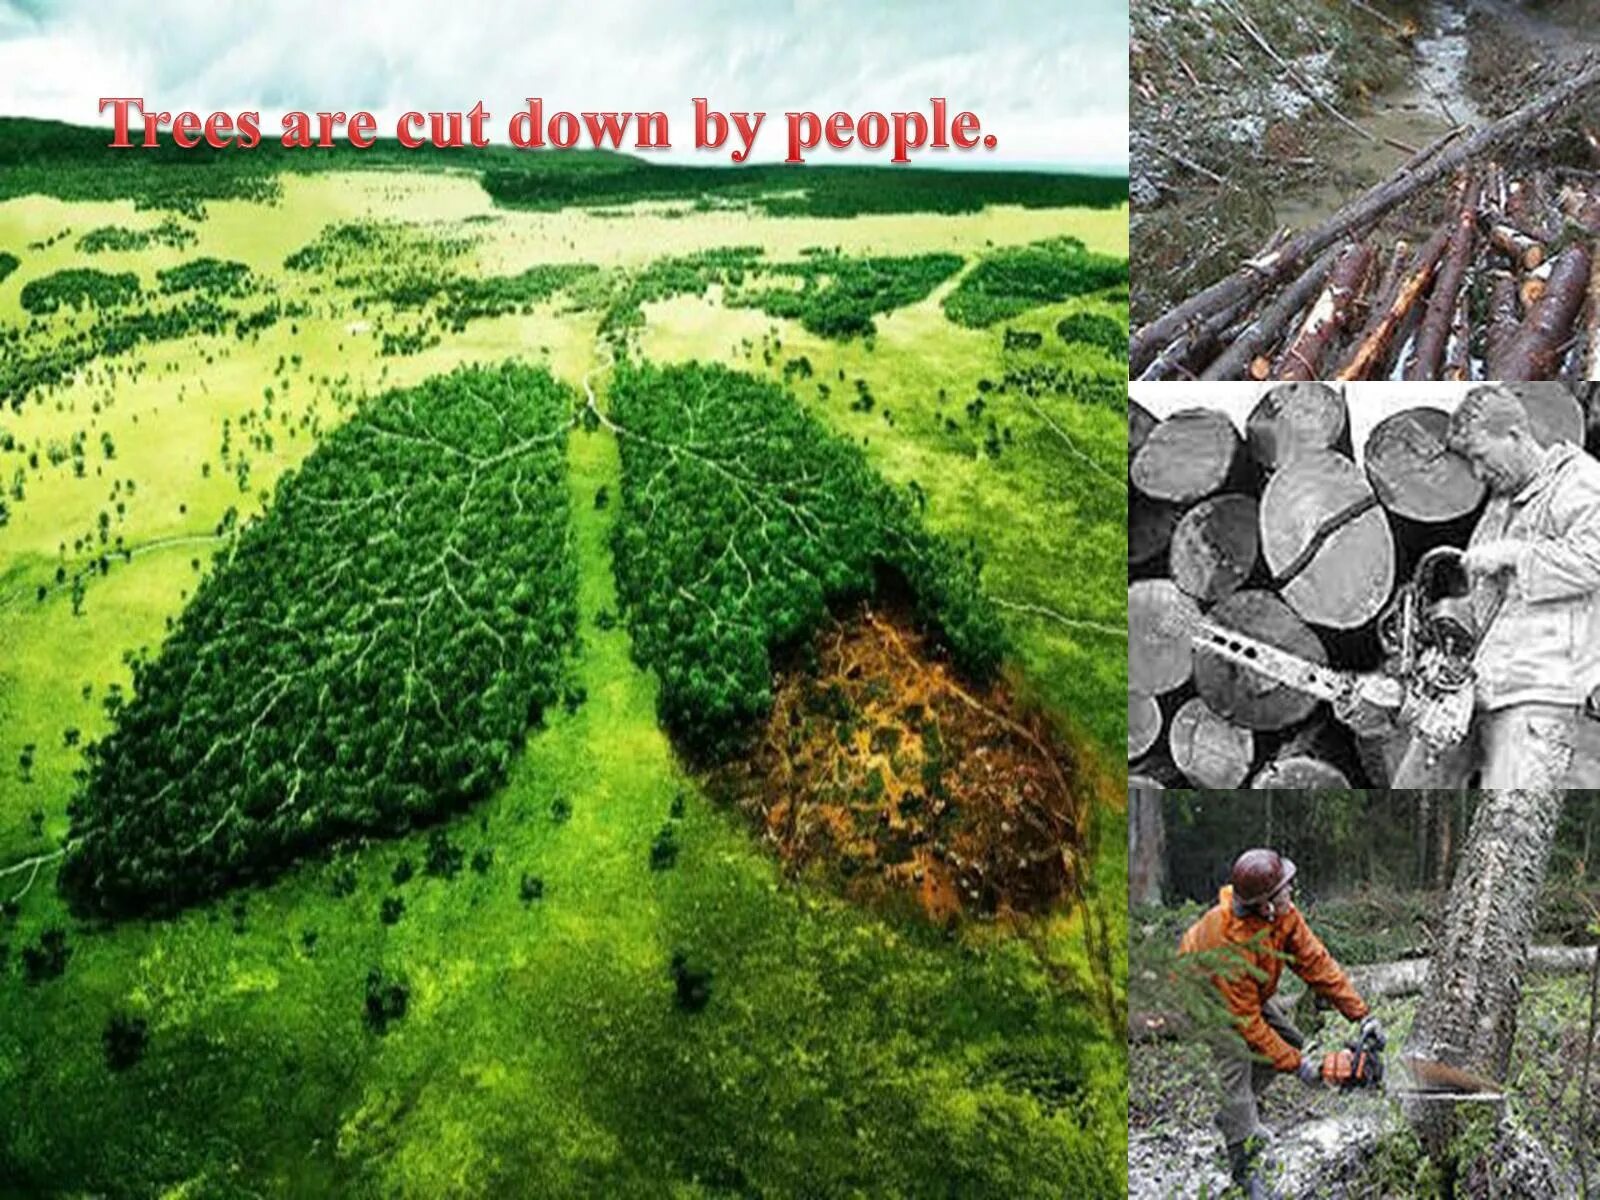 Cutting down Trees. Trees are Cut down. Nature in Danger. Nature is in Danger. Cut them down